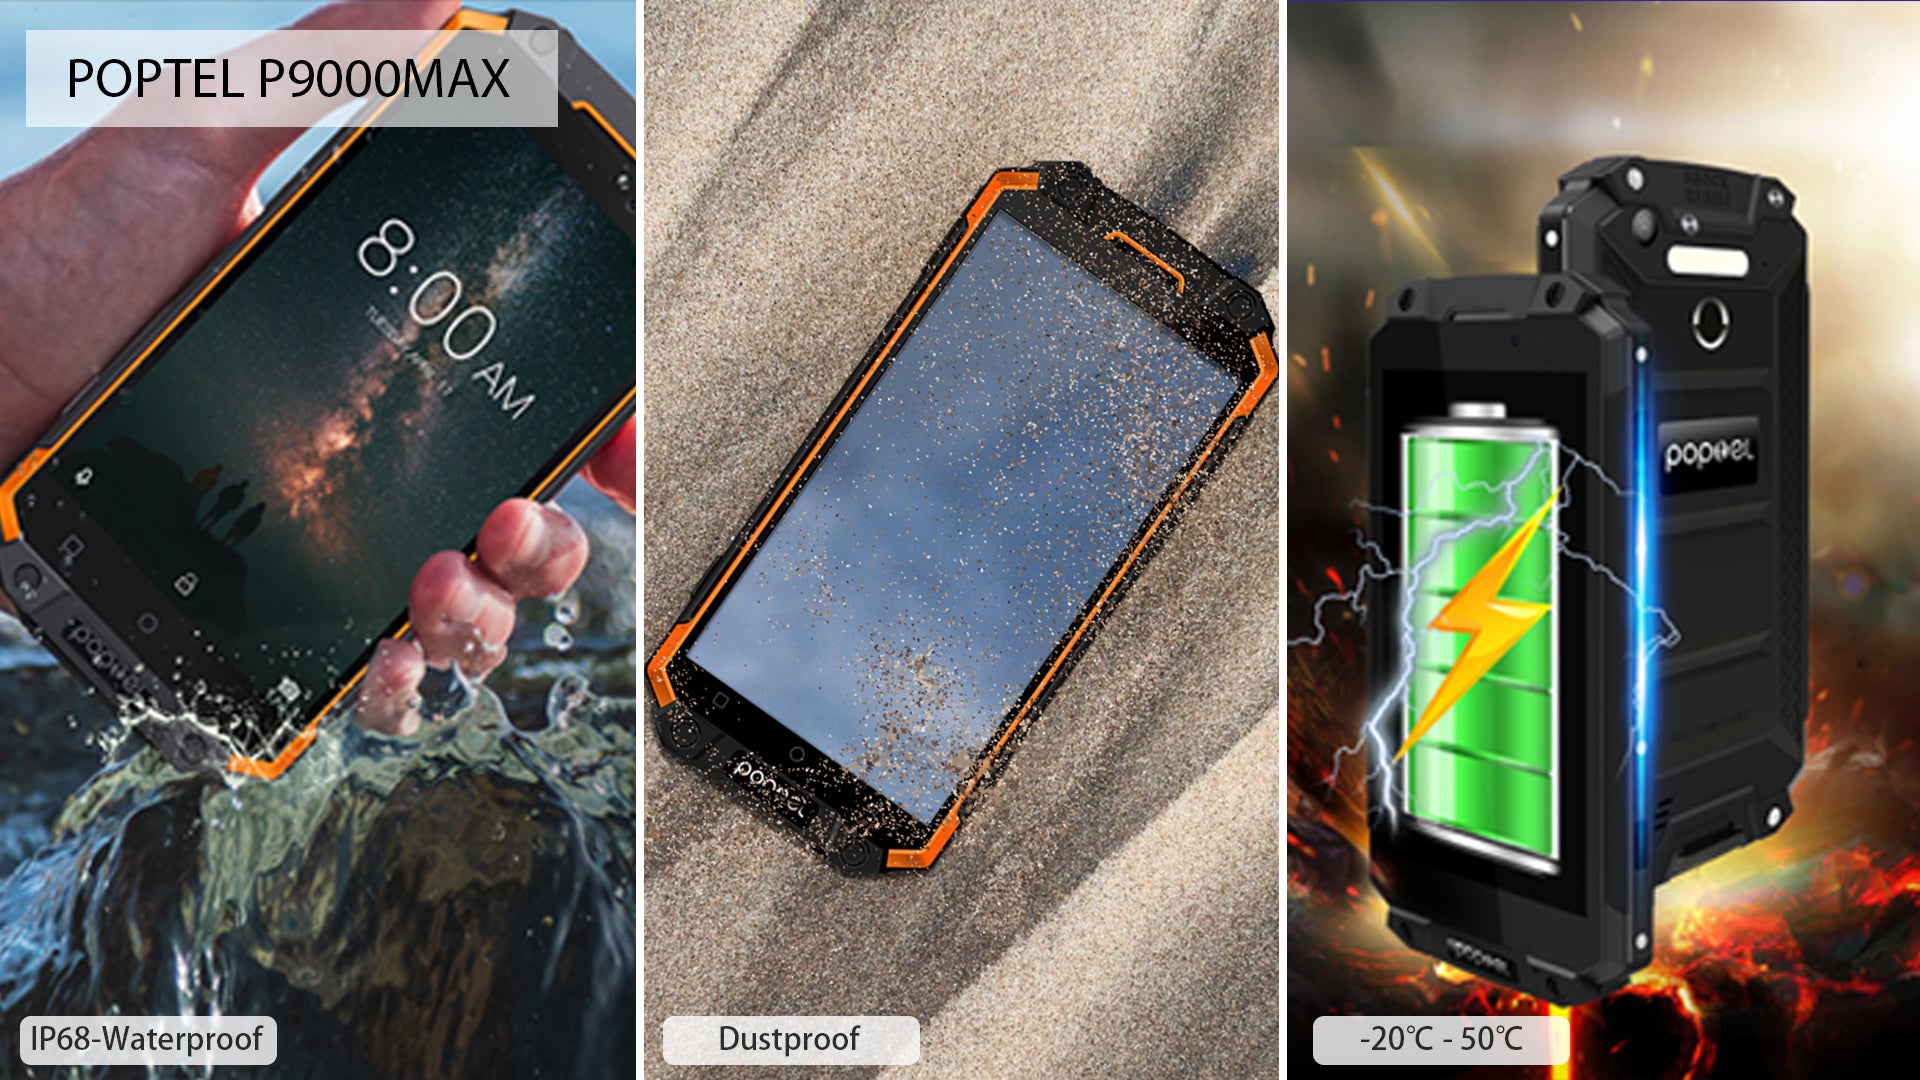 Poptel&#039;s industry-tailored line of rugged Androids stars in an Amazon sales event